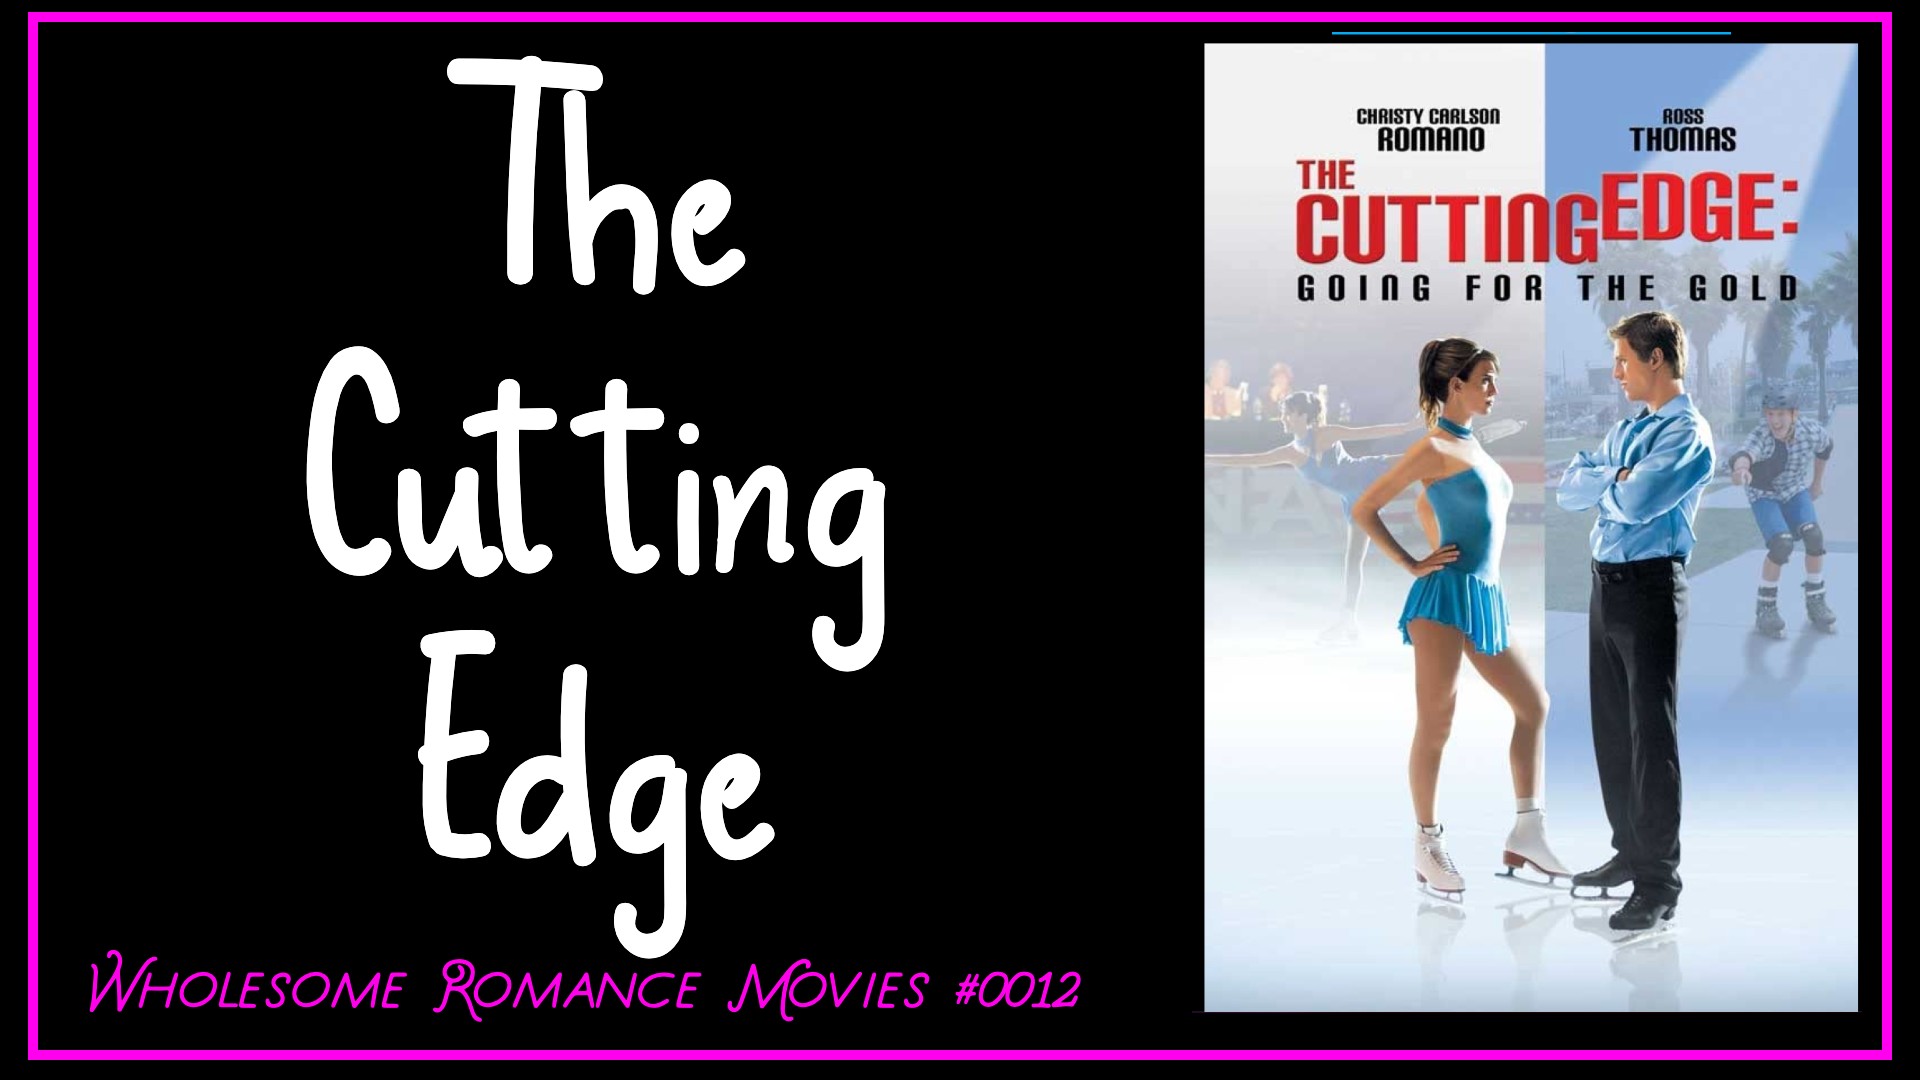 The Cutting Edge: Going for the Gold (2006) WRM Review